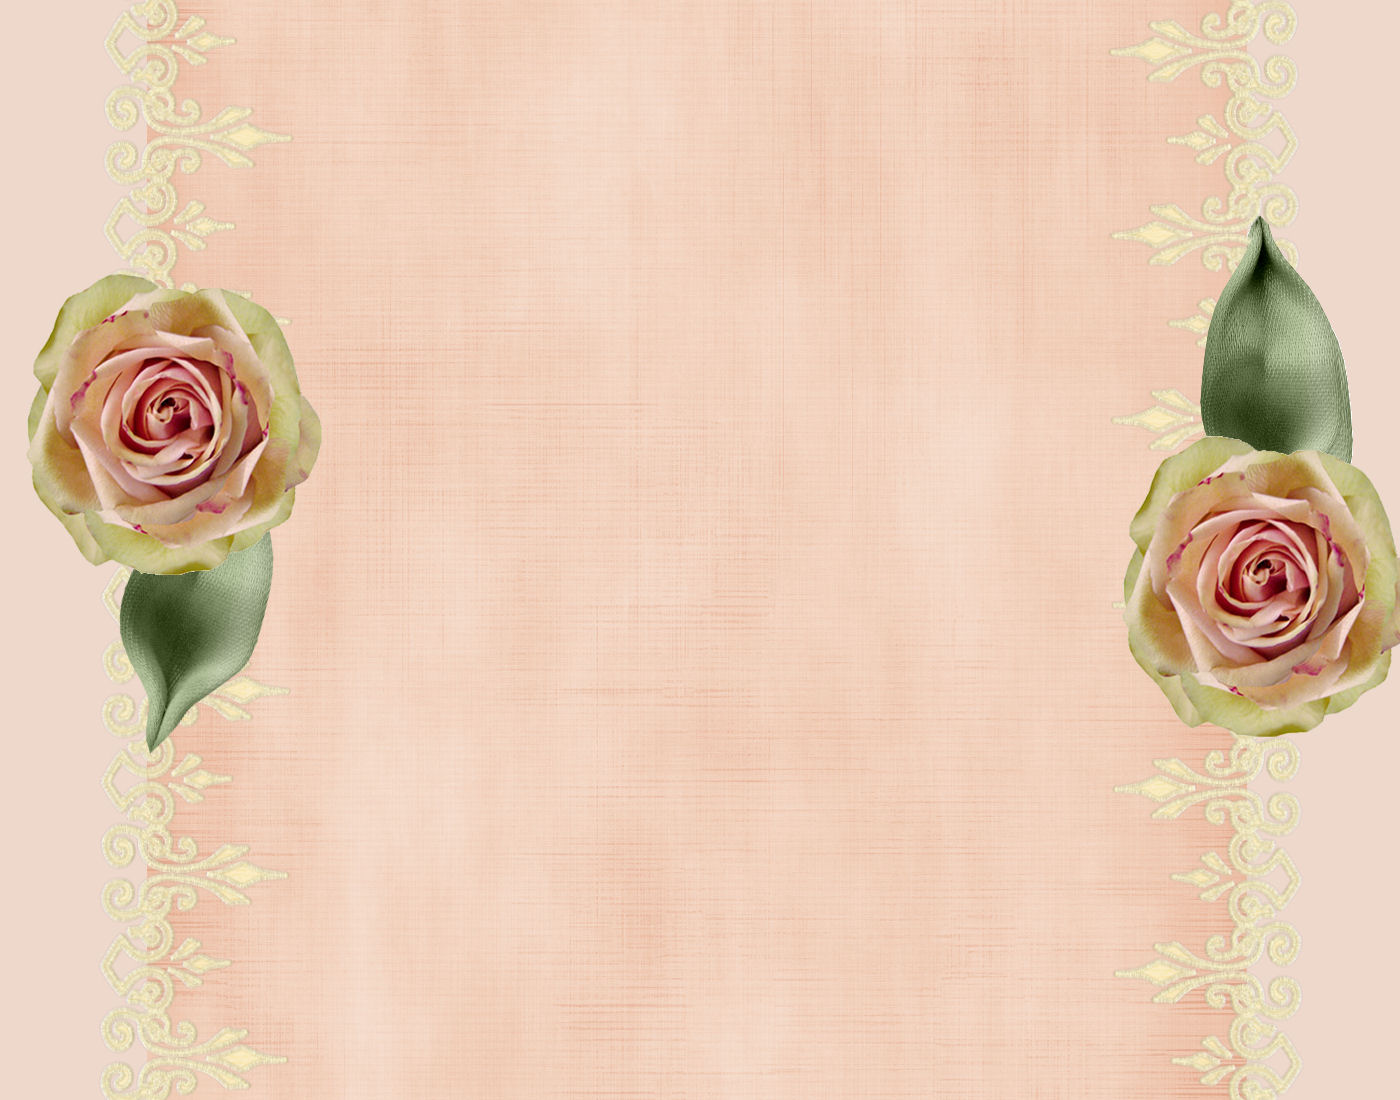 Elegant Roses Backgrounds powerpoint backgrounds